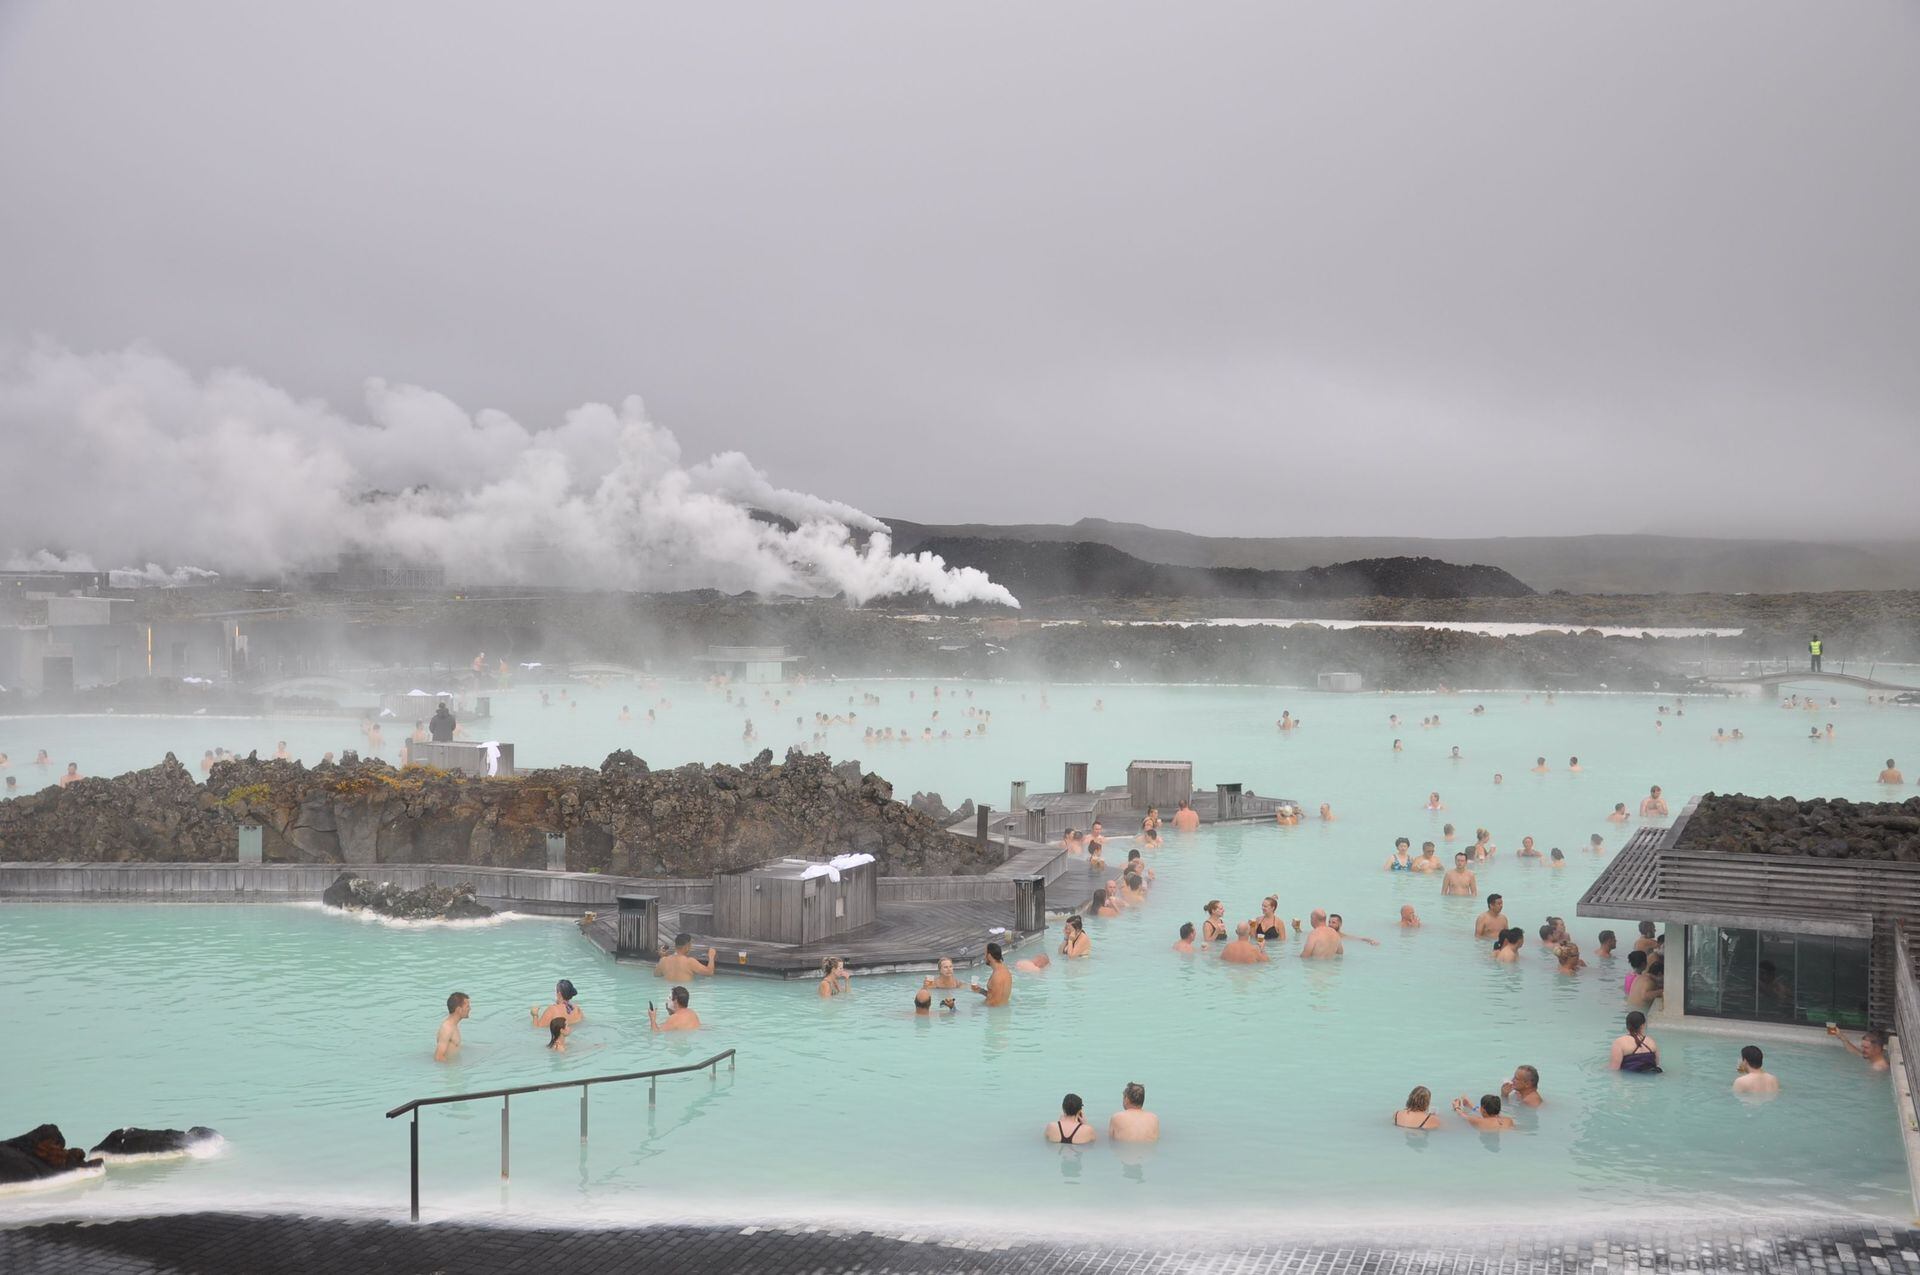 Iceland volcano: Blue Lagoon spa reopens despite eruption fears, Iceland